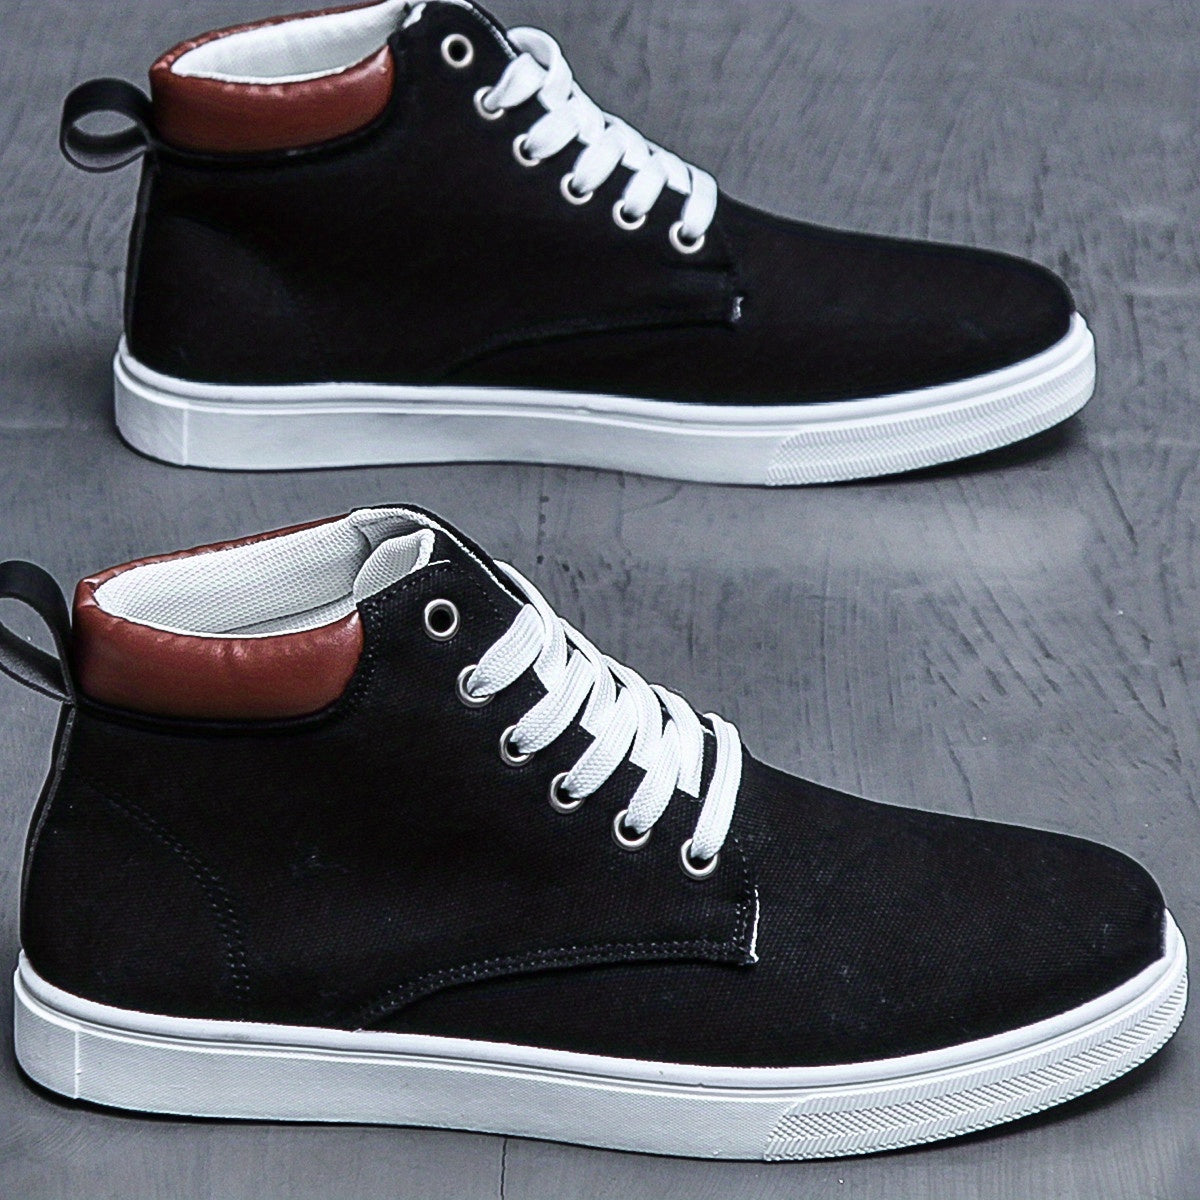 Canvas High Top Skate Shoes - Men's Lace-up Sneakers for Halloween